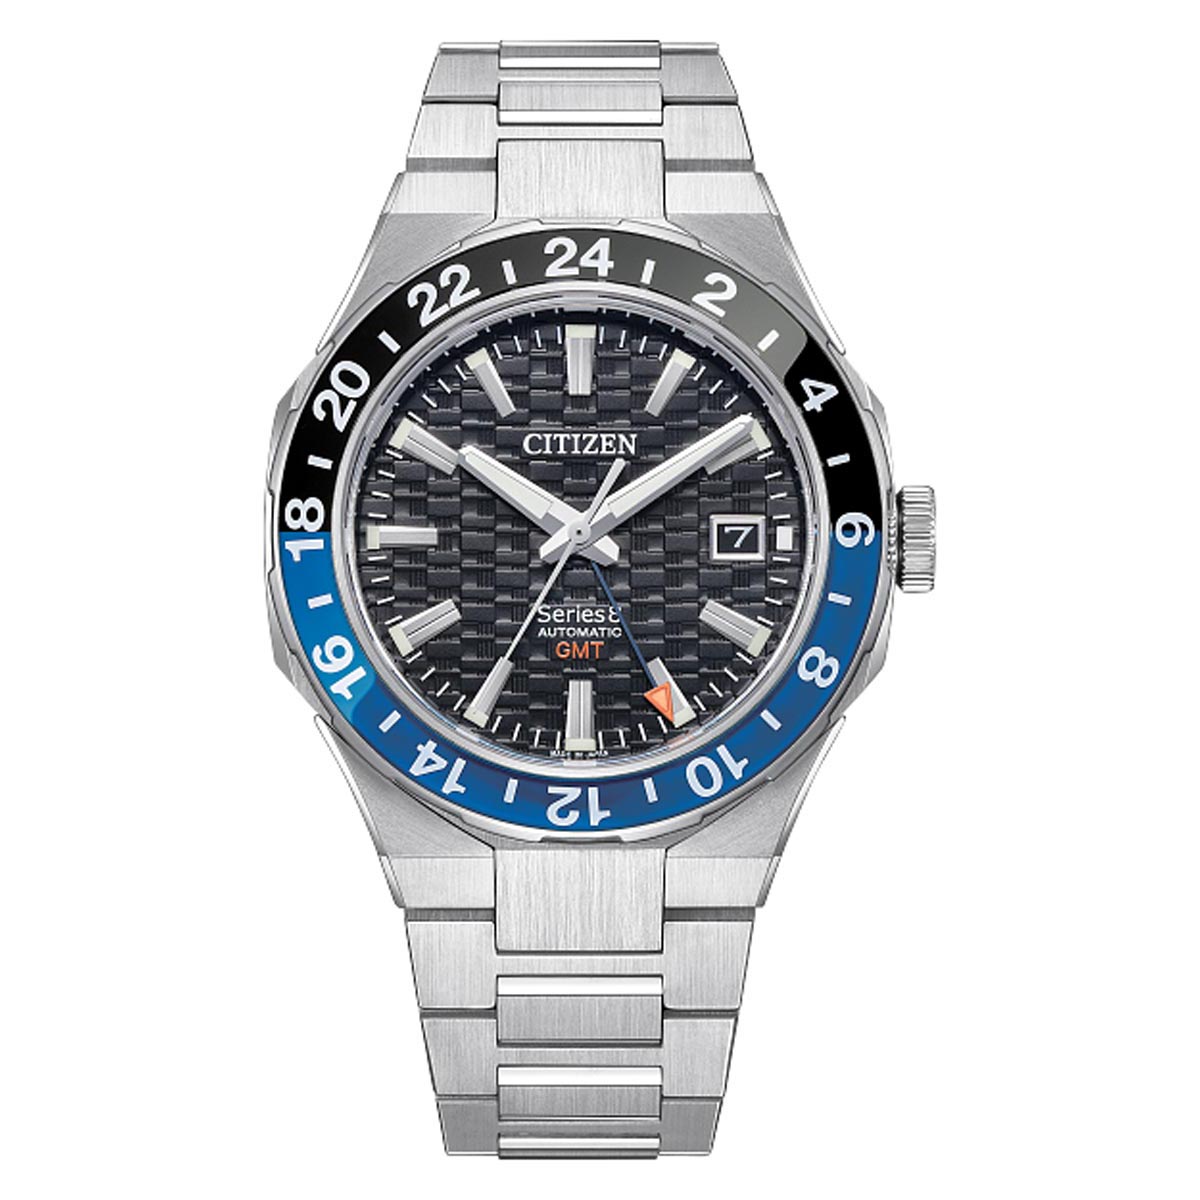 Citizen Series8 800 GMT Mens Watch with Black Dial and Stainless Steel Bracelet (automatic movement)